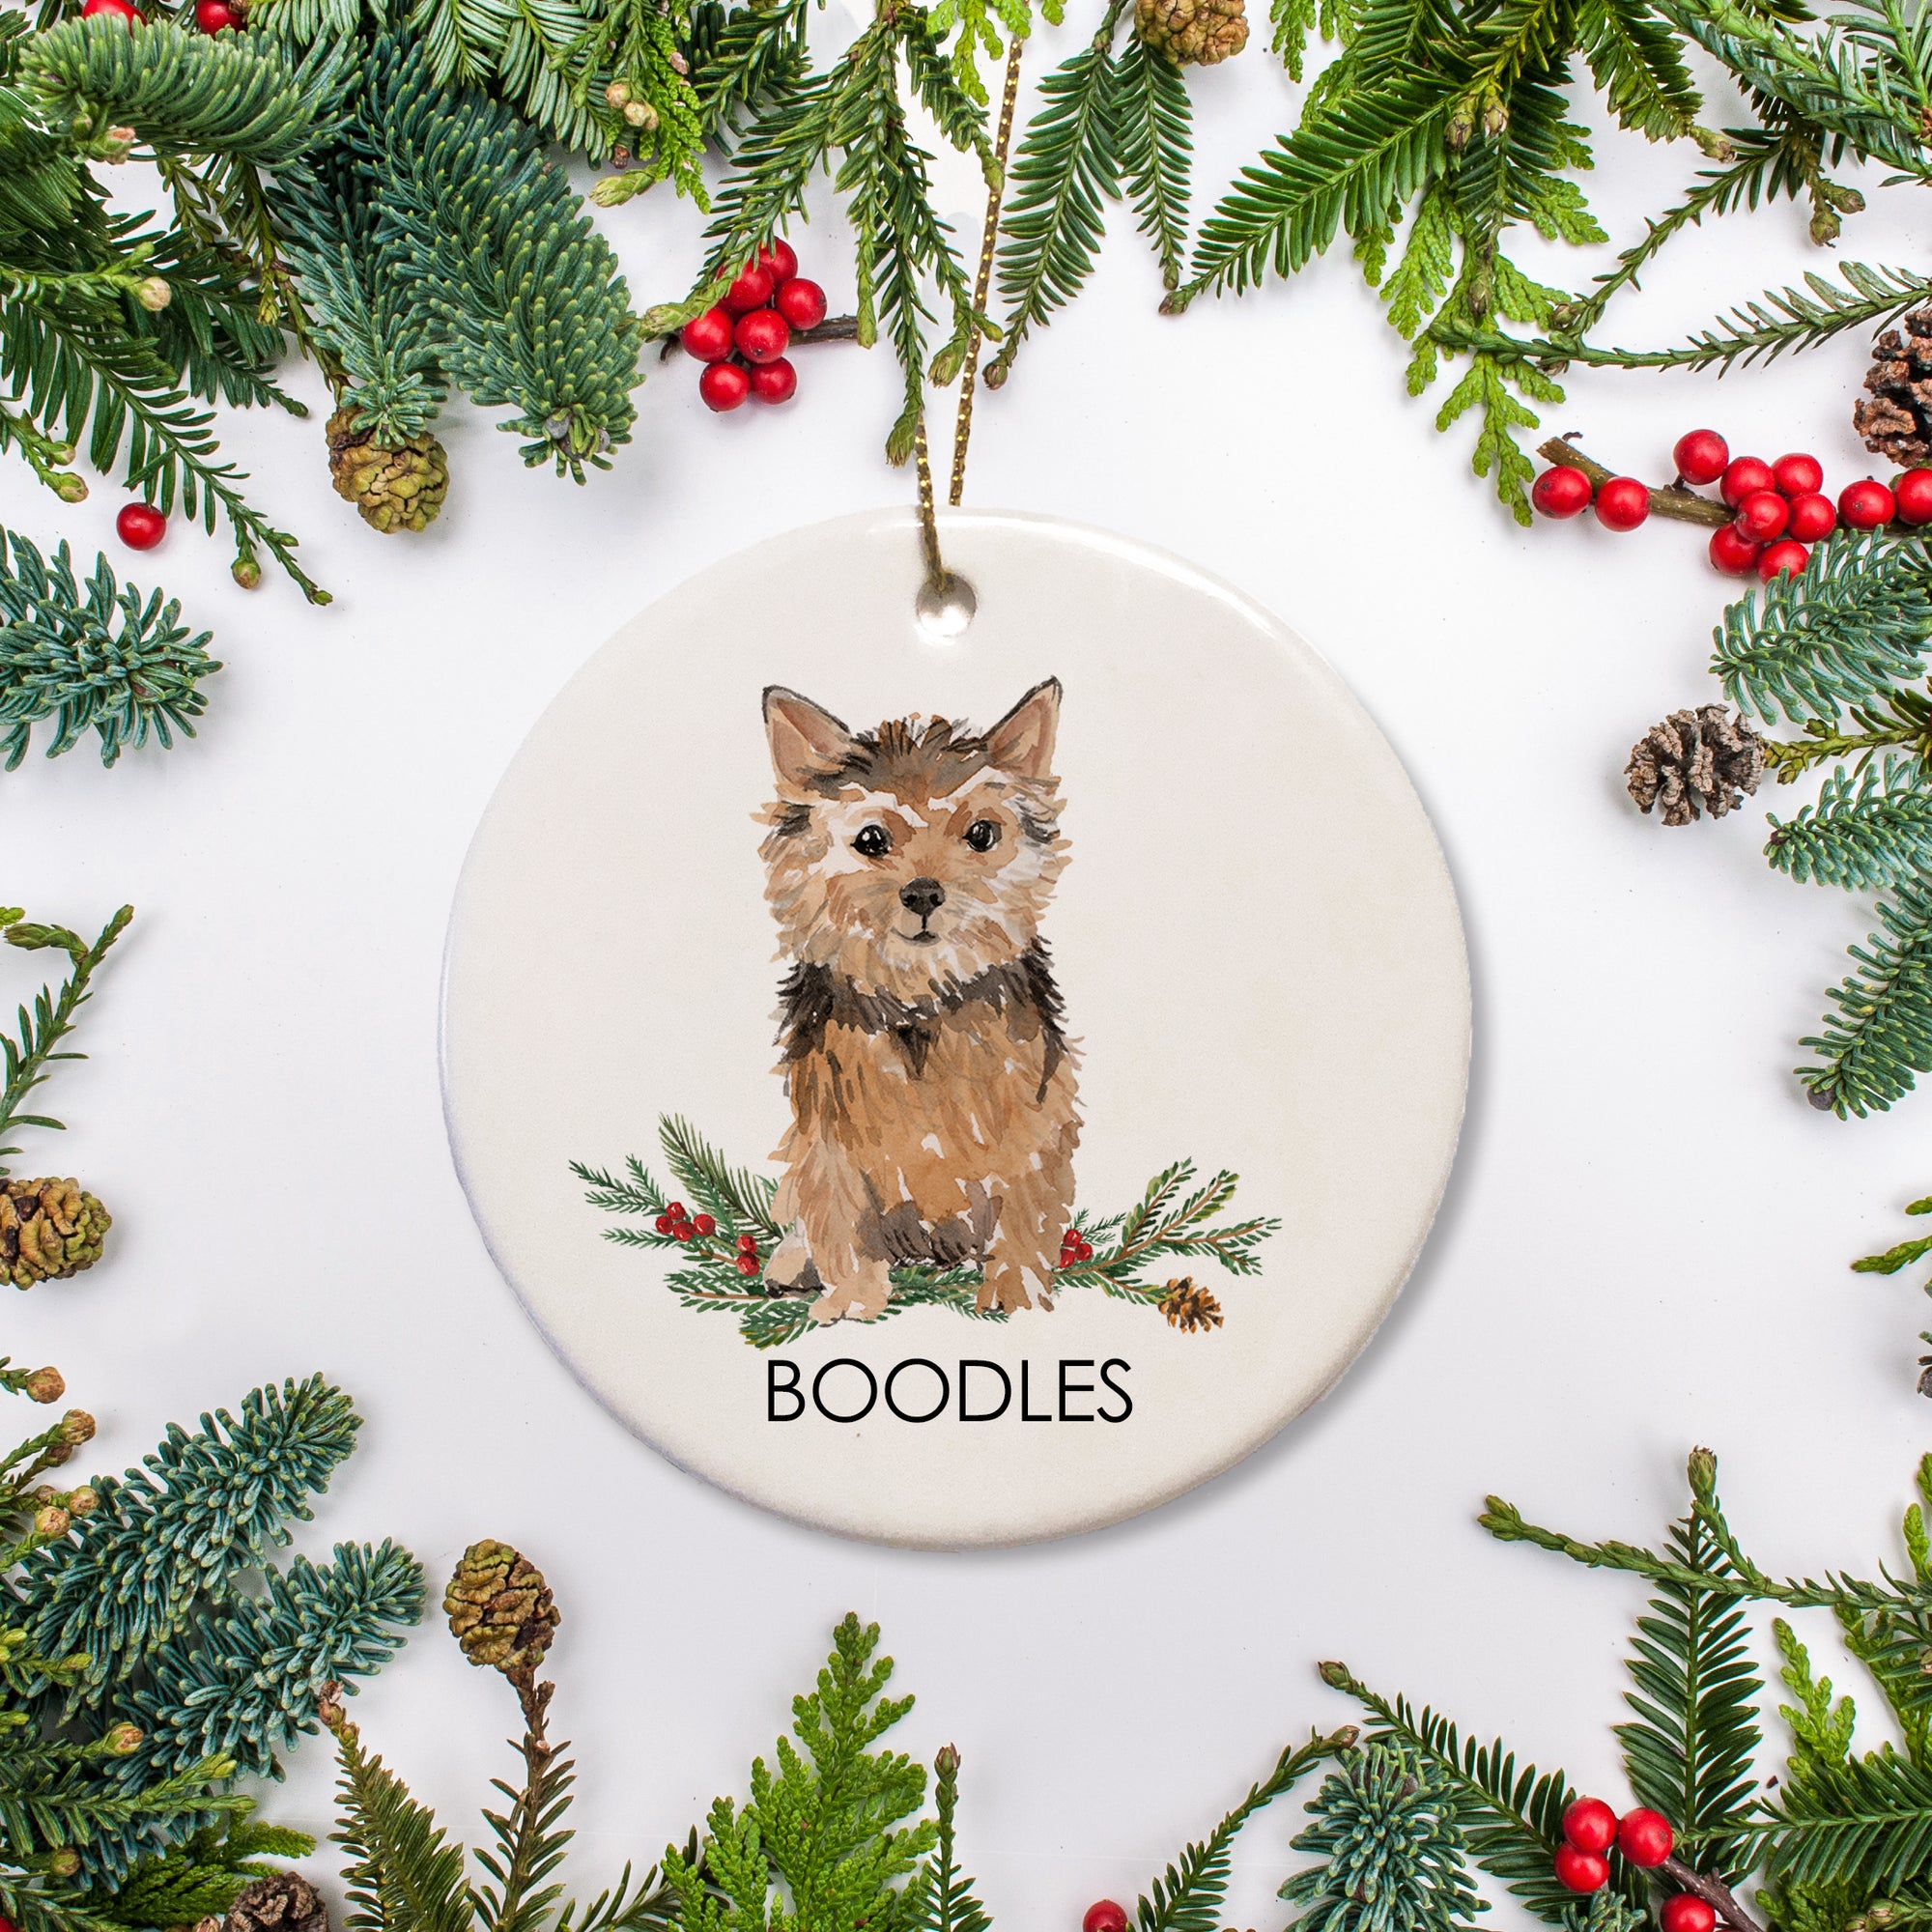 Norwich Terrier Personalized Christmas ornament, personalized with your dog's name. Printed on a sturdy ceramic ornament in our Nashville studio